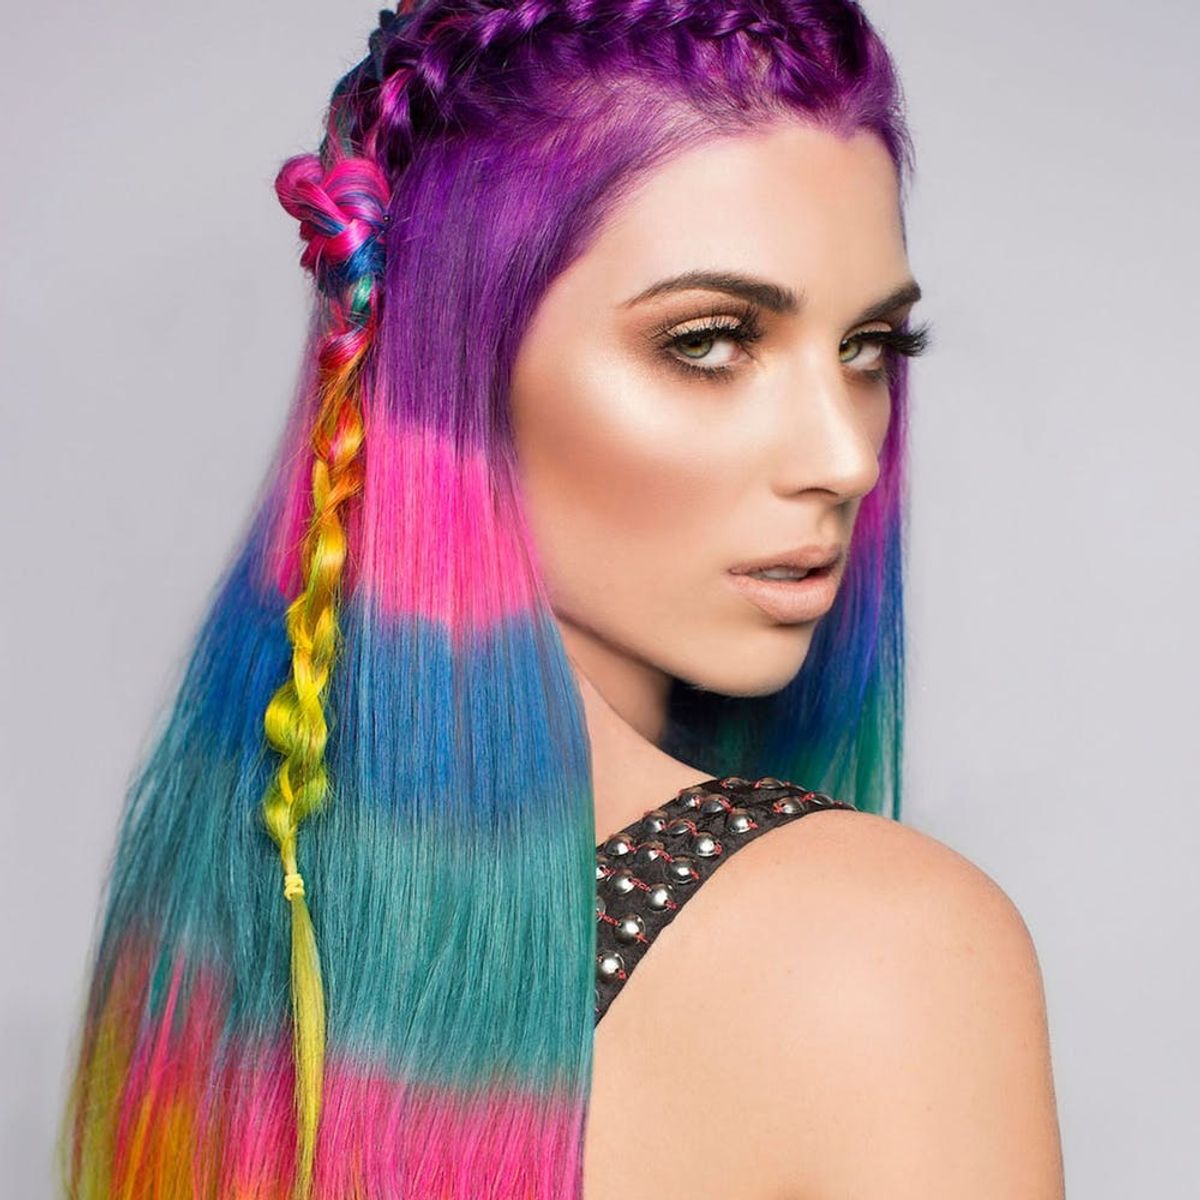 The Color Blocked Hair Dye Trend Takes Rainbow Hair to the Next Level